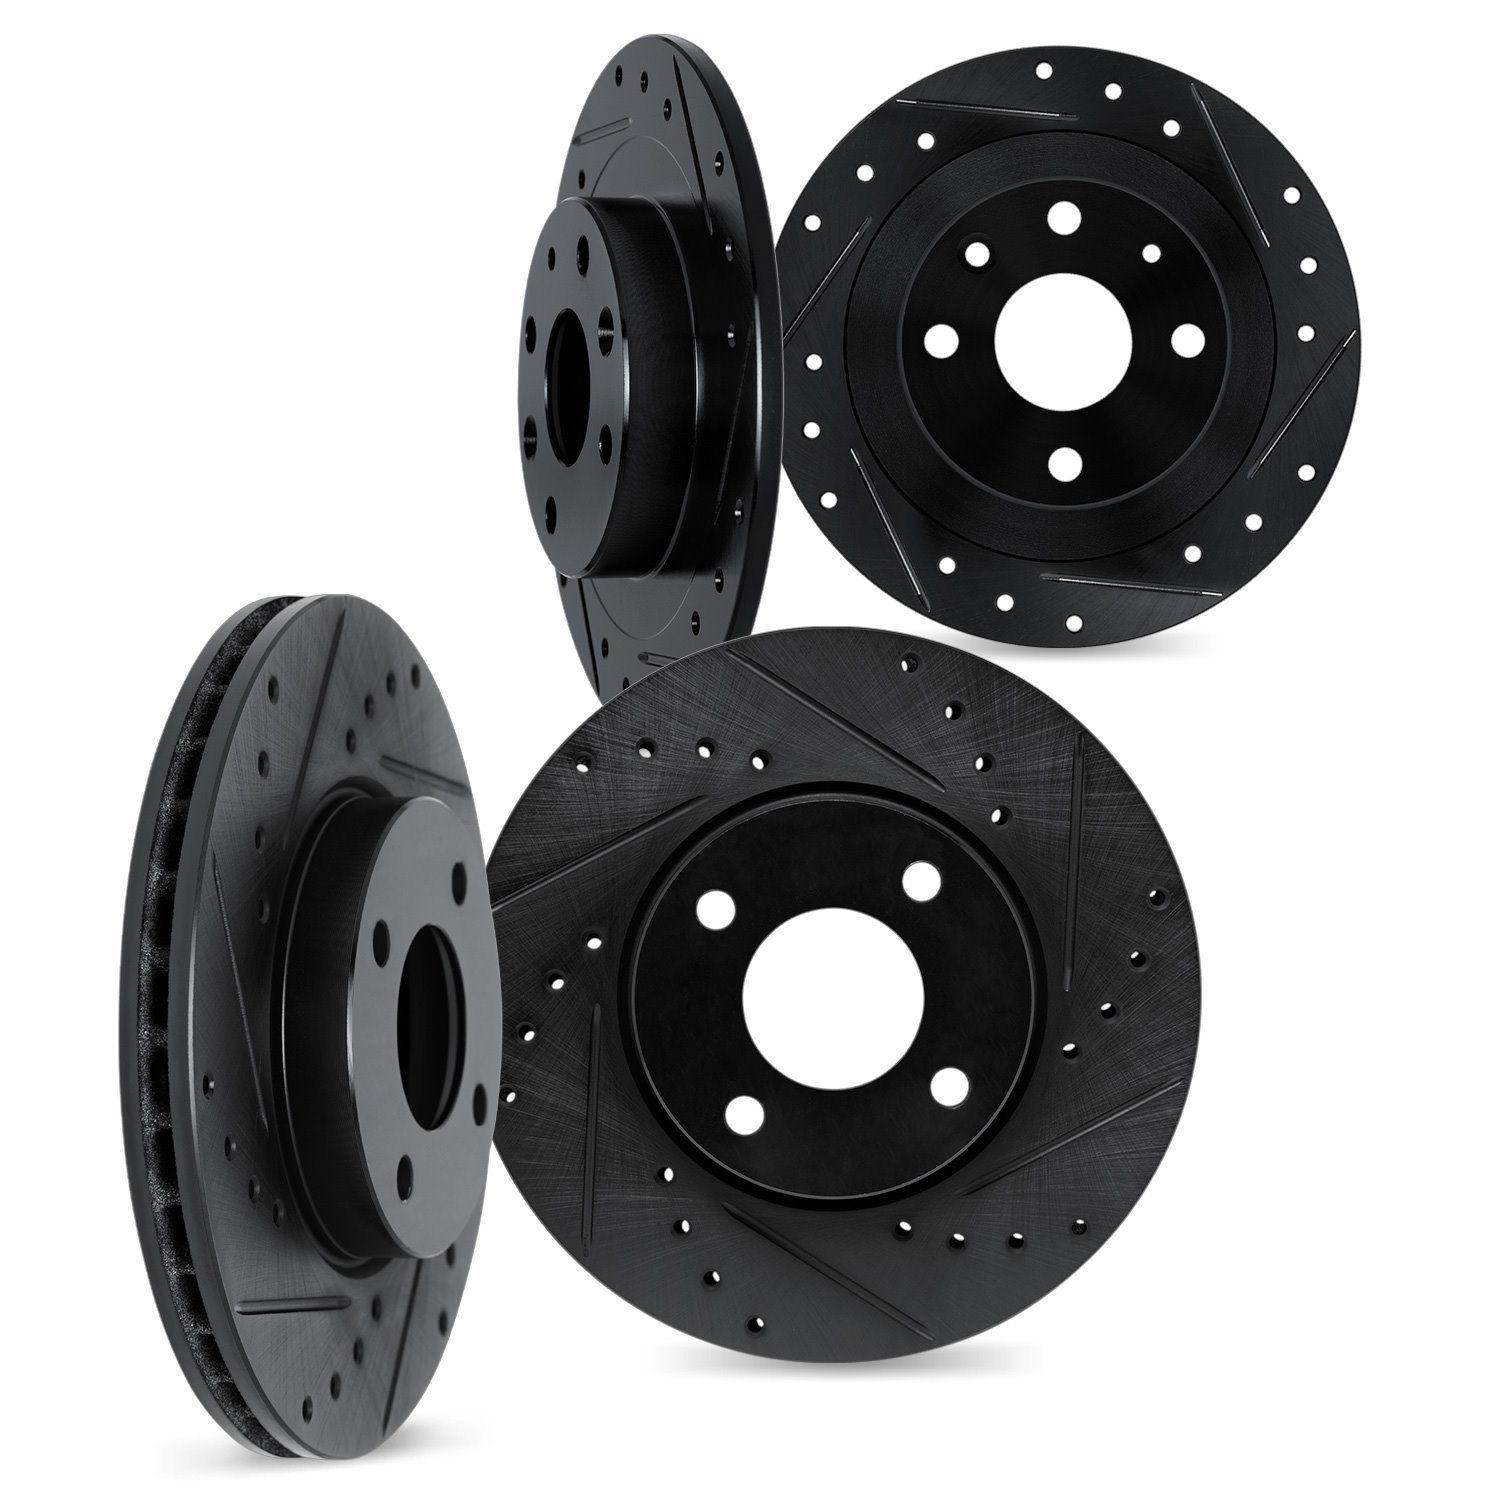 8004-67099 Drilled/Slotted Brake Rotors [Black], 1991-2006 Infiniti/Nissan, Position: Front and Rear